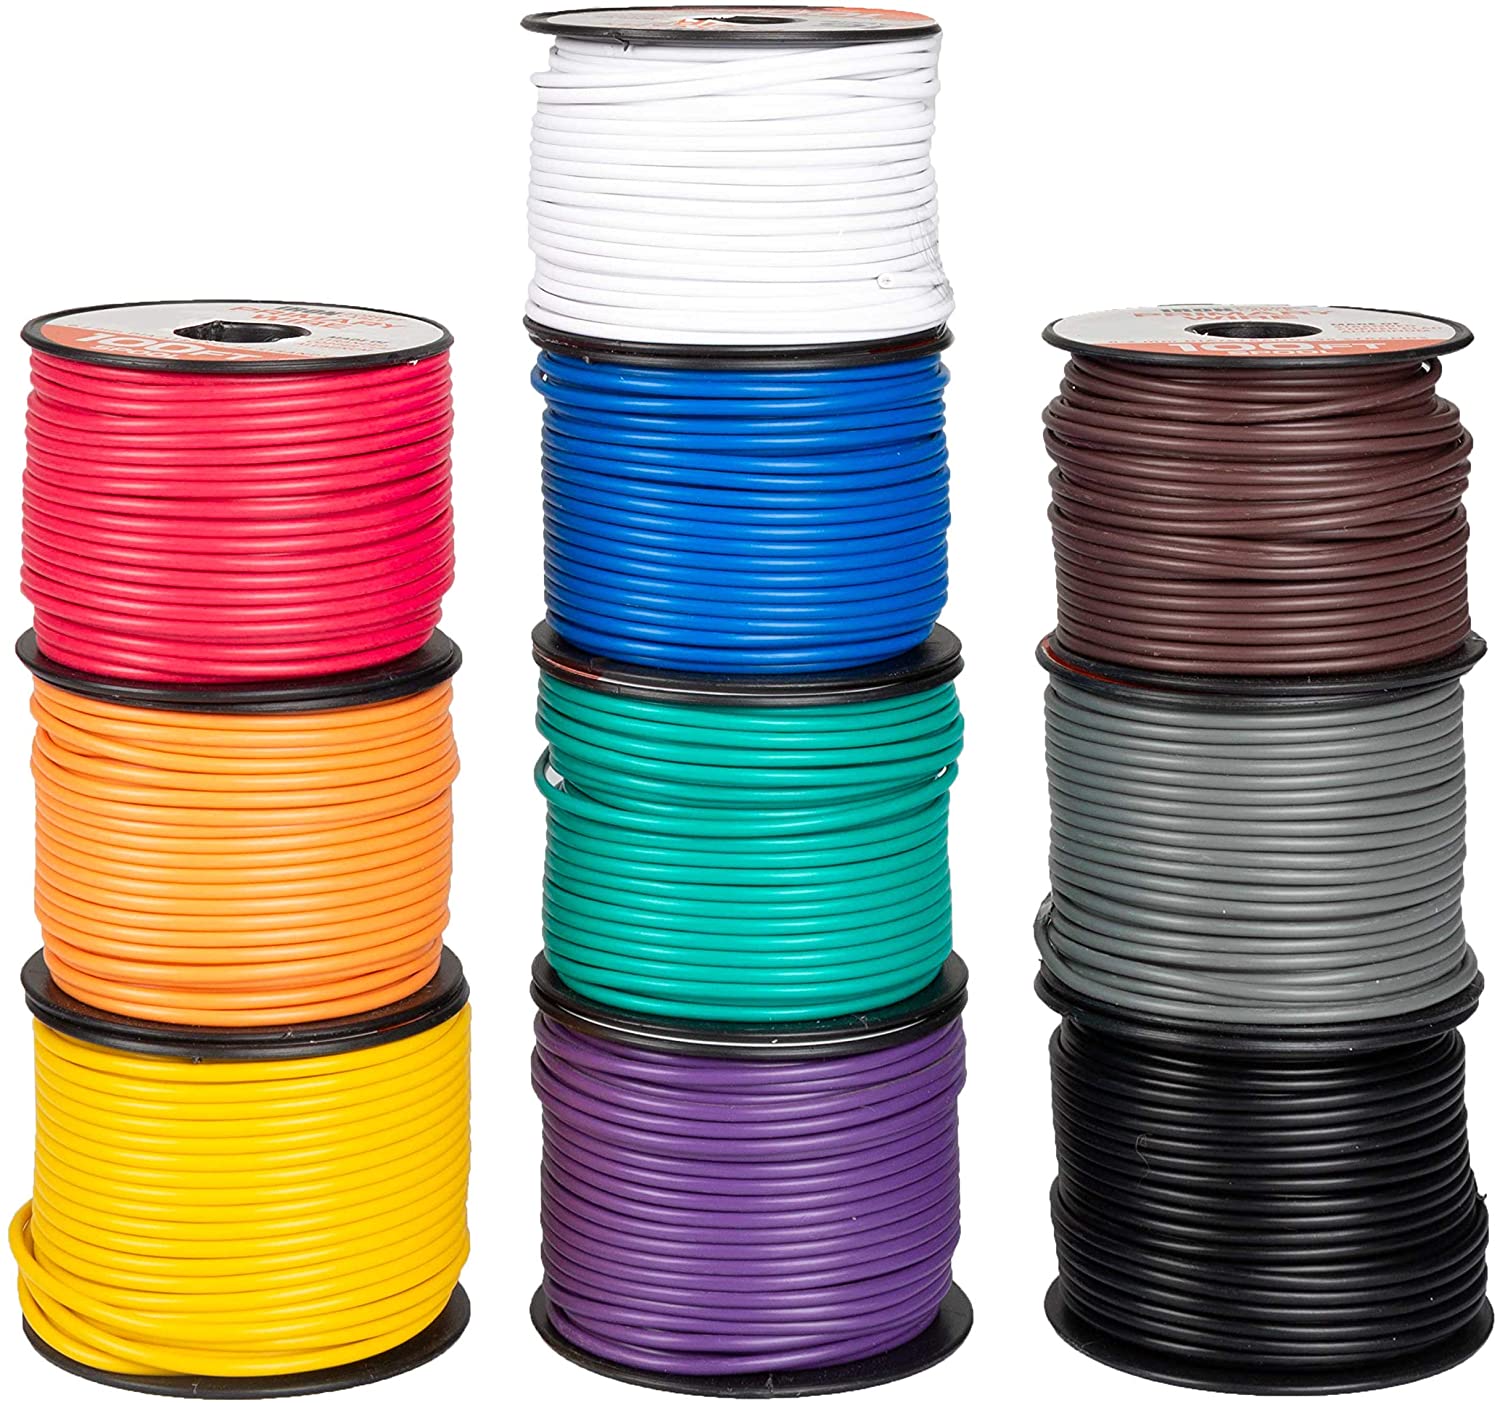 14 Gauge Primary Wire - 10 Roll Assortment Pack - 100 Ft of Copper Clad  Aluminum Wire per Roll